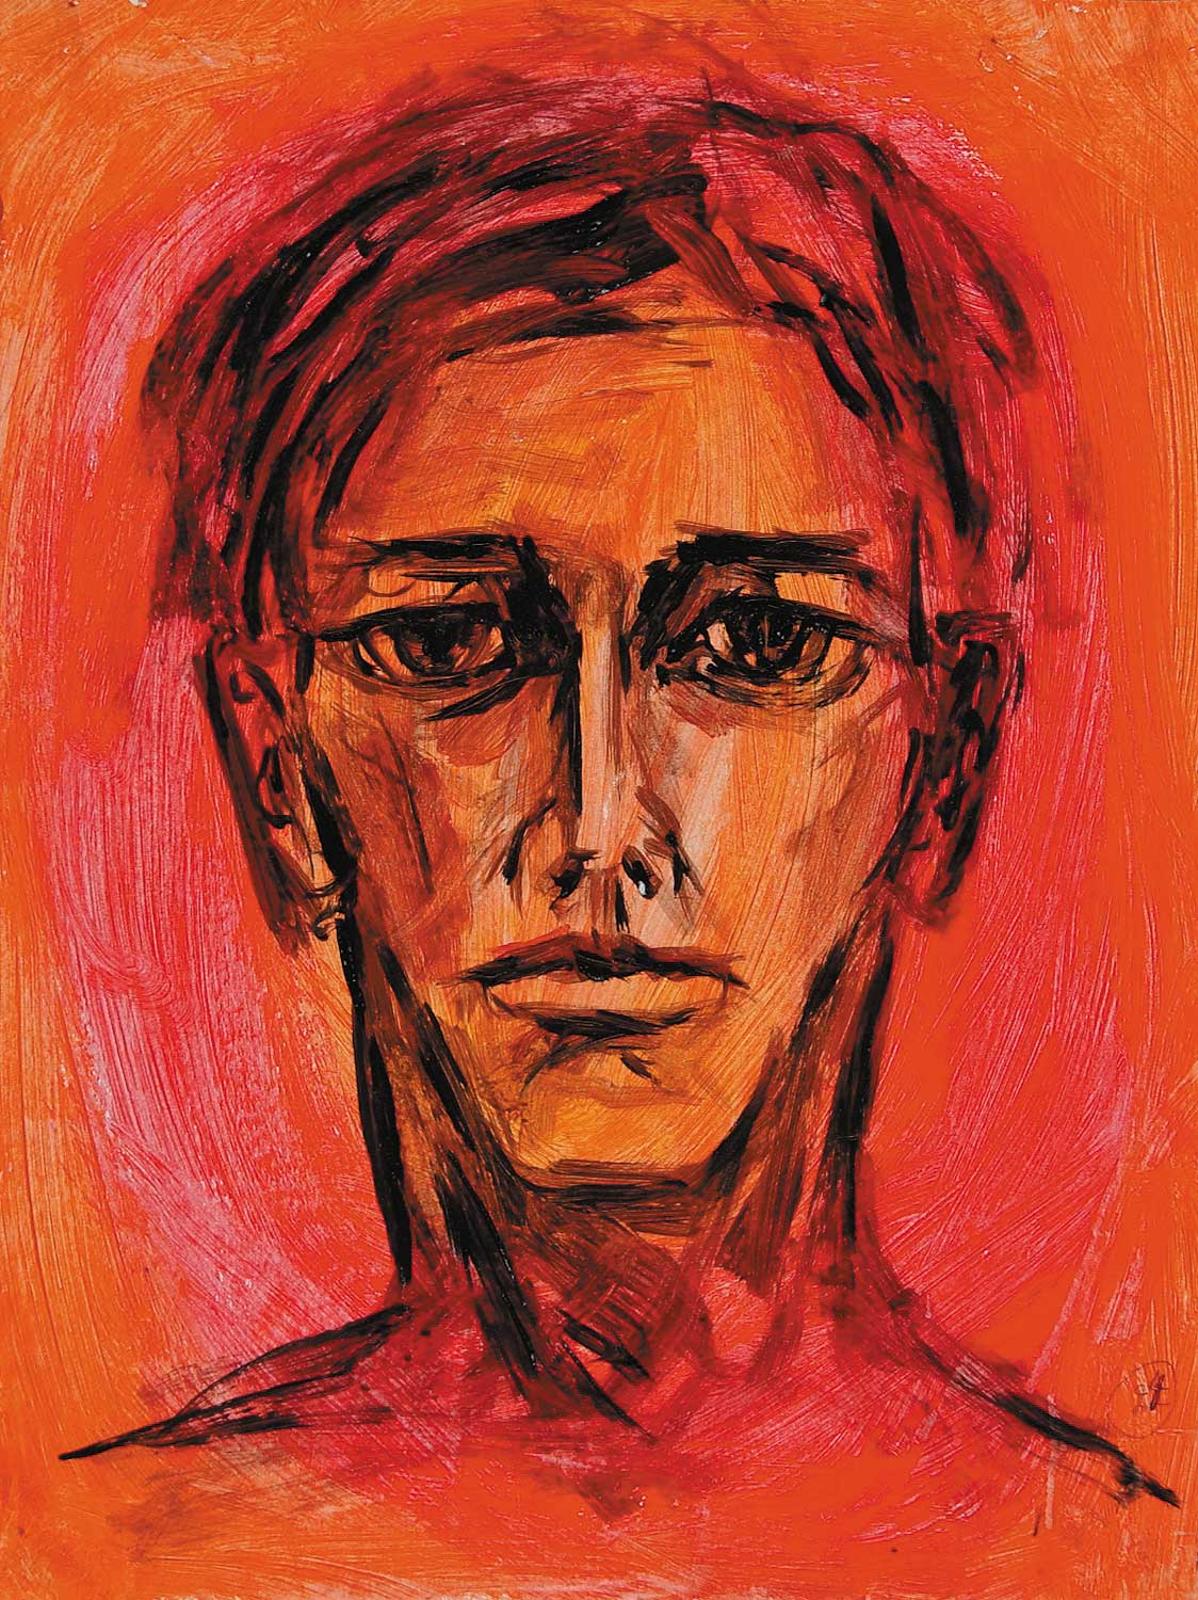 Robert Charles Aller (1922-2008) - Untitled - Self Portrait with Pink and Red Background I